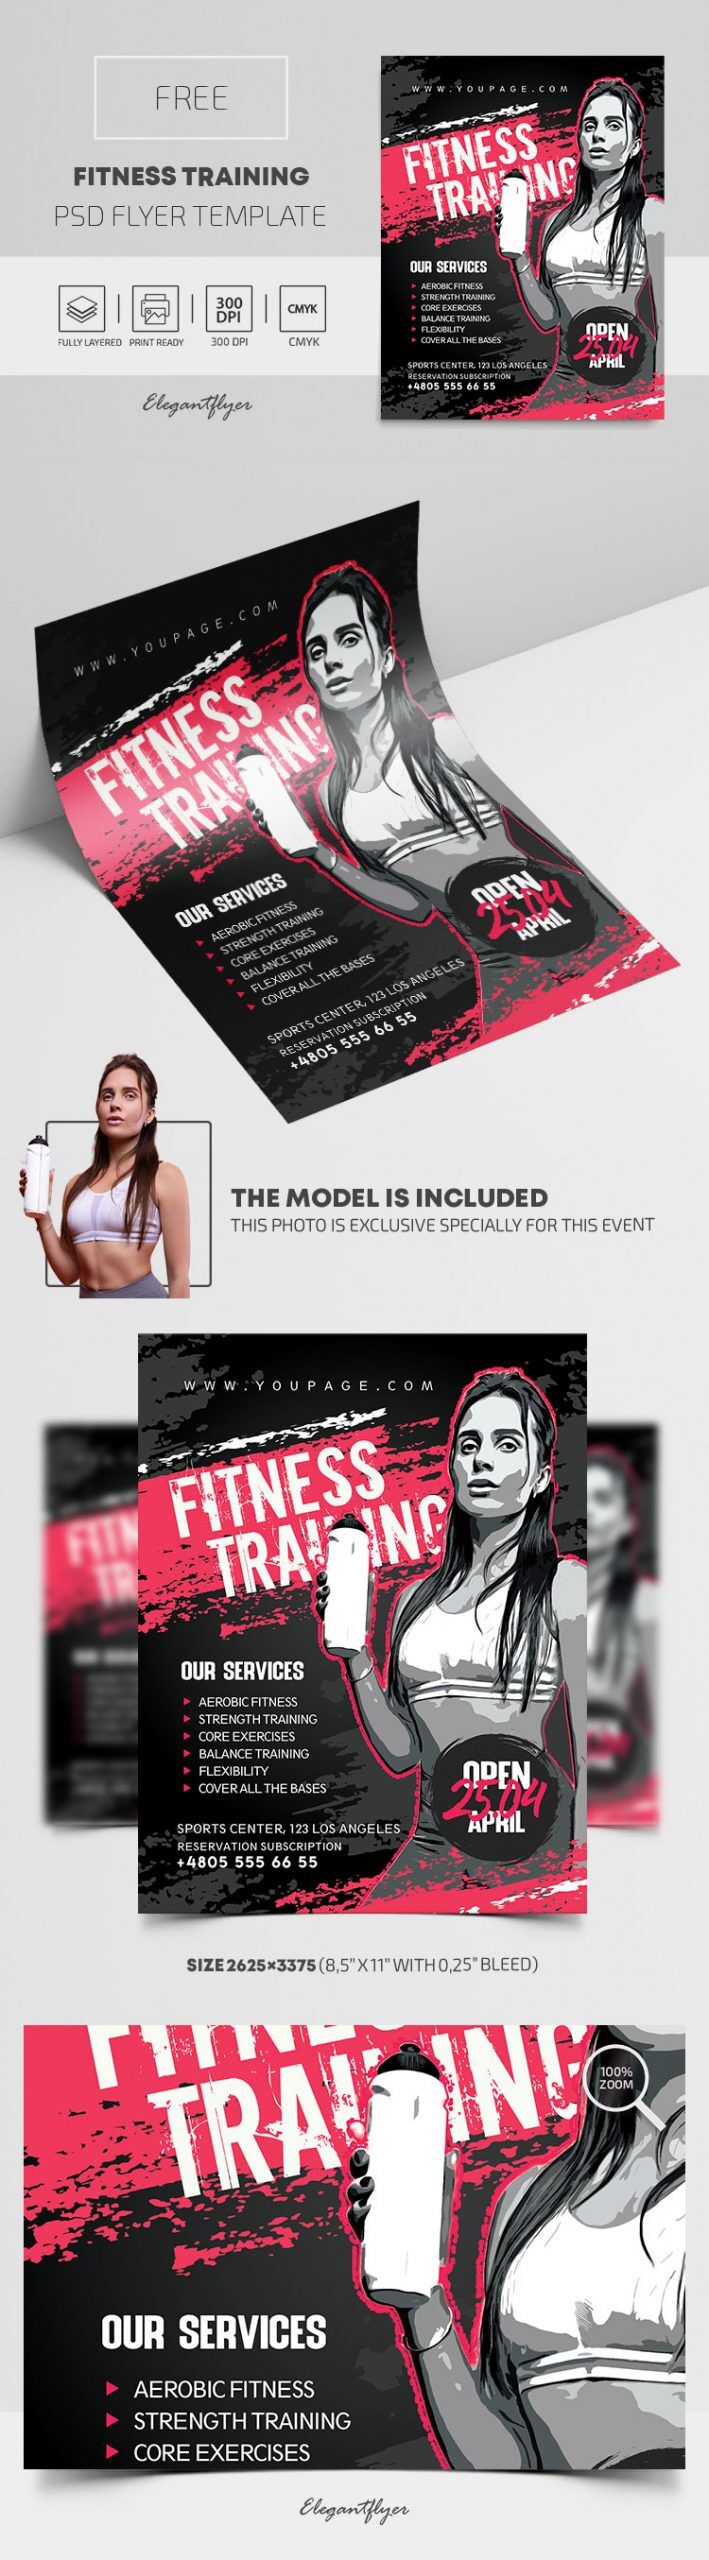 Neat Modern Online Personal Training and Workouts Flyer Template